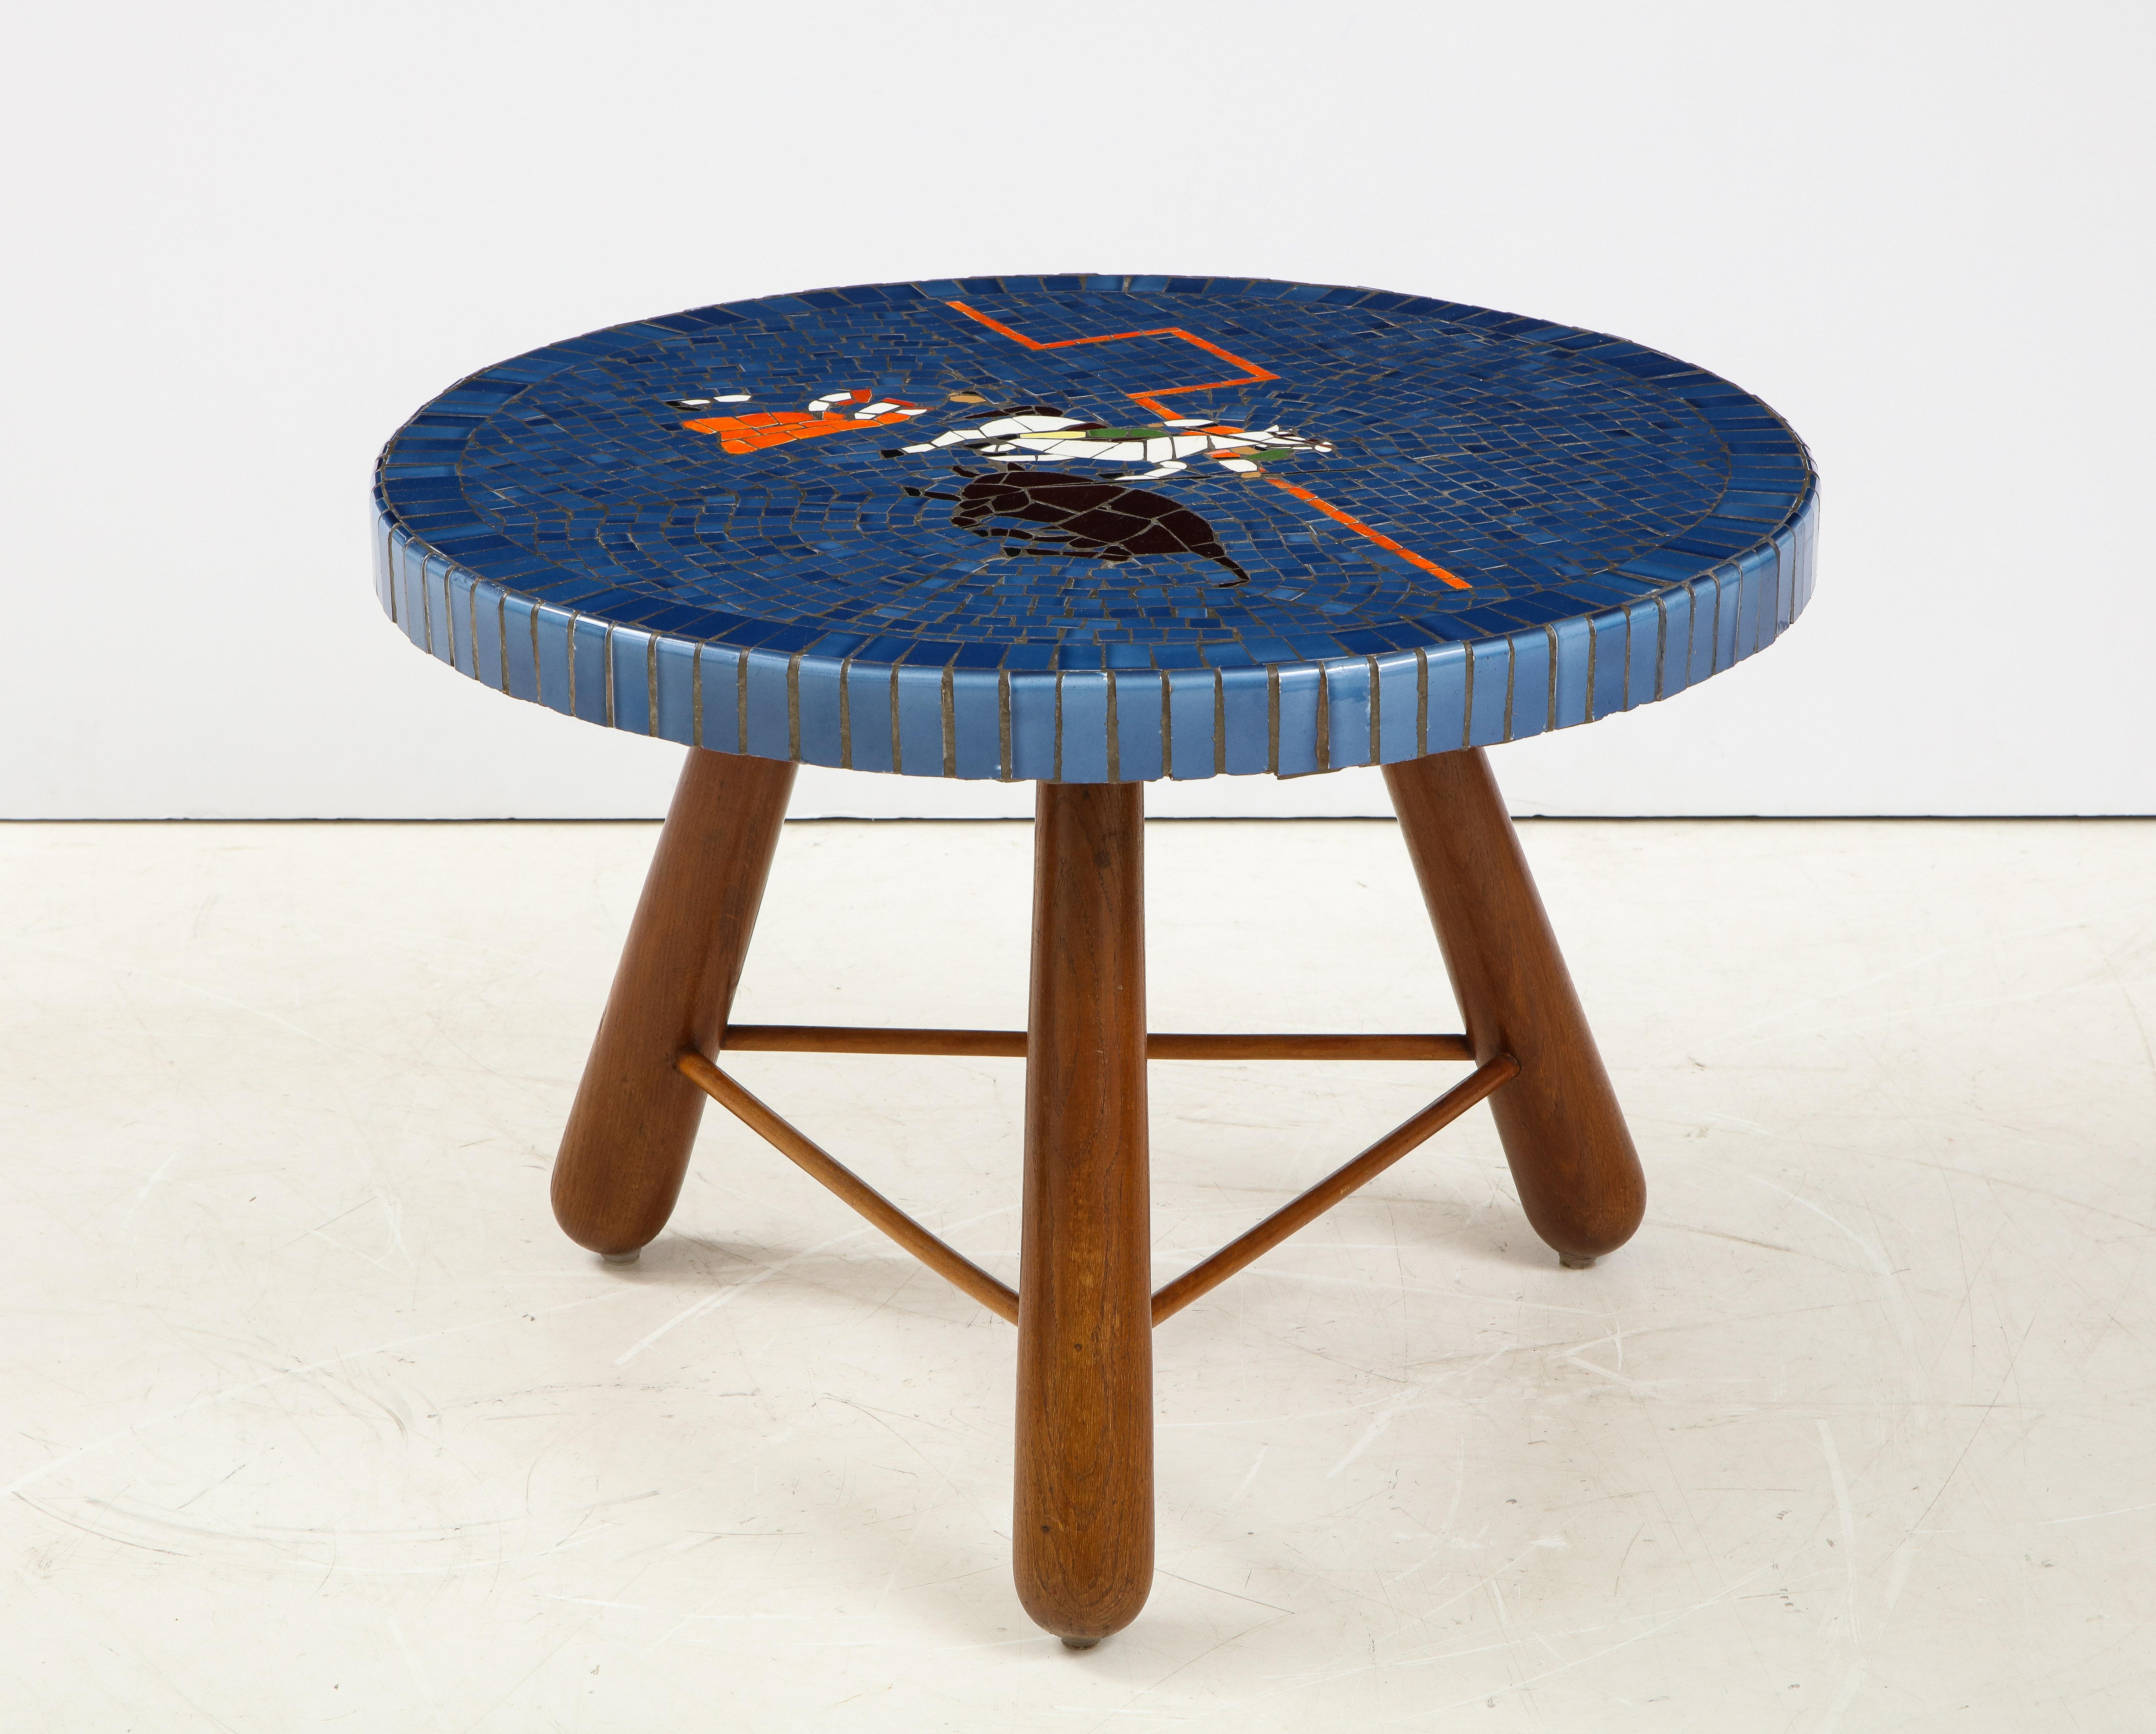 Mid-20th Century Danish Tile Top and Oak Side Table, attributed to Otto Færge, Circa 1940-1950